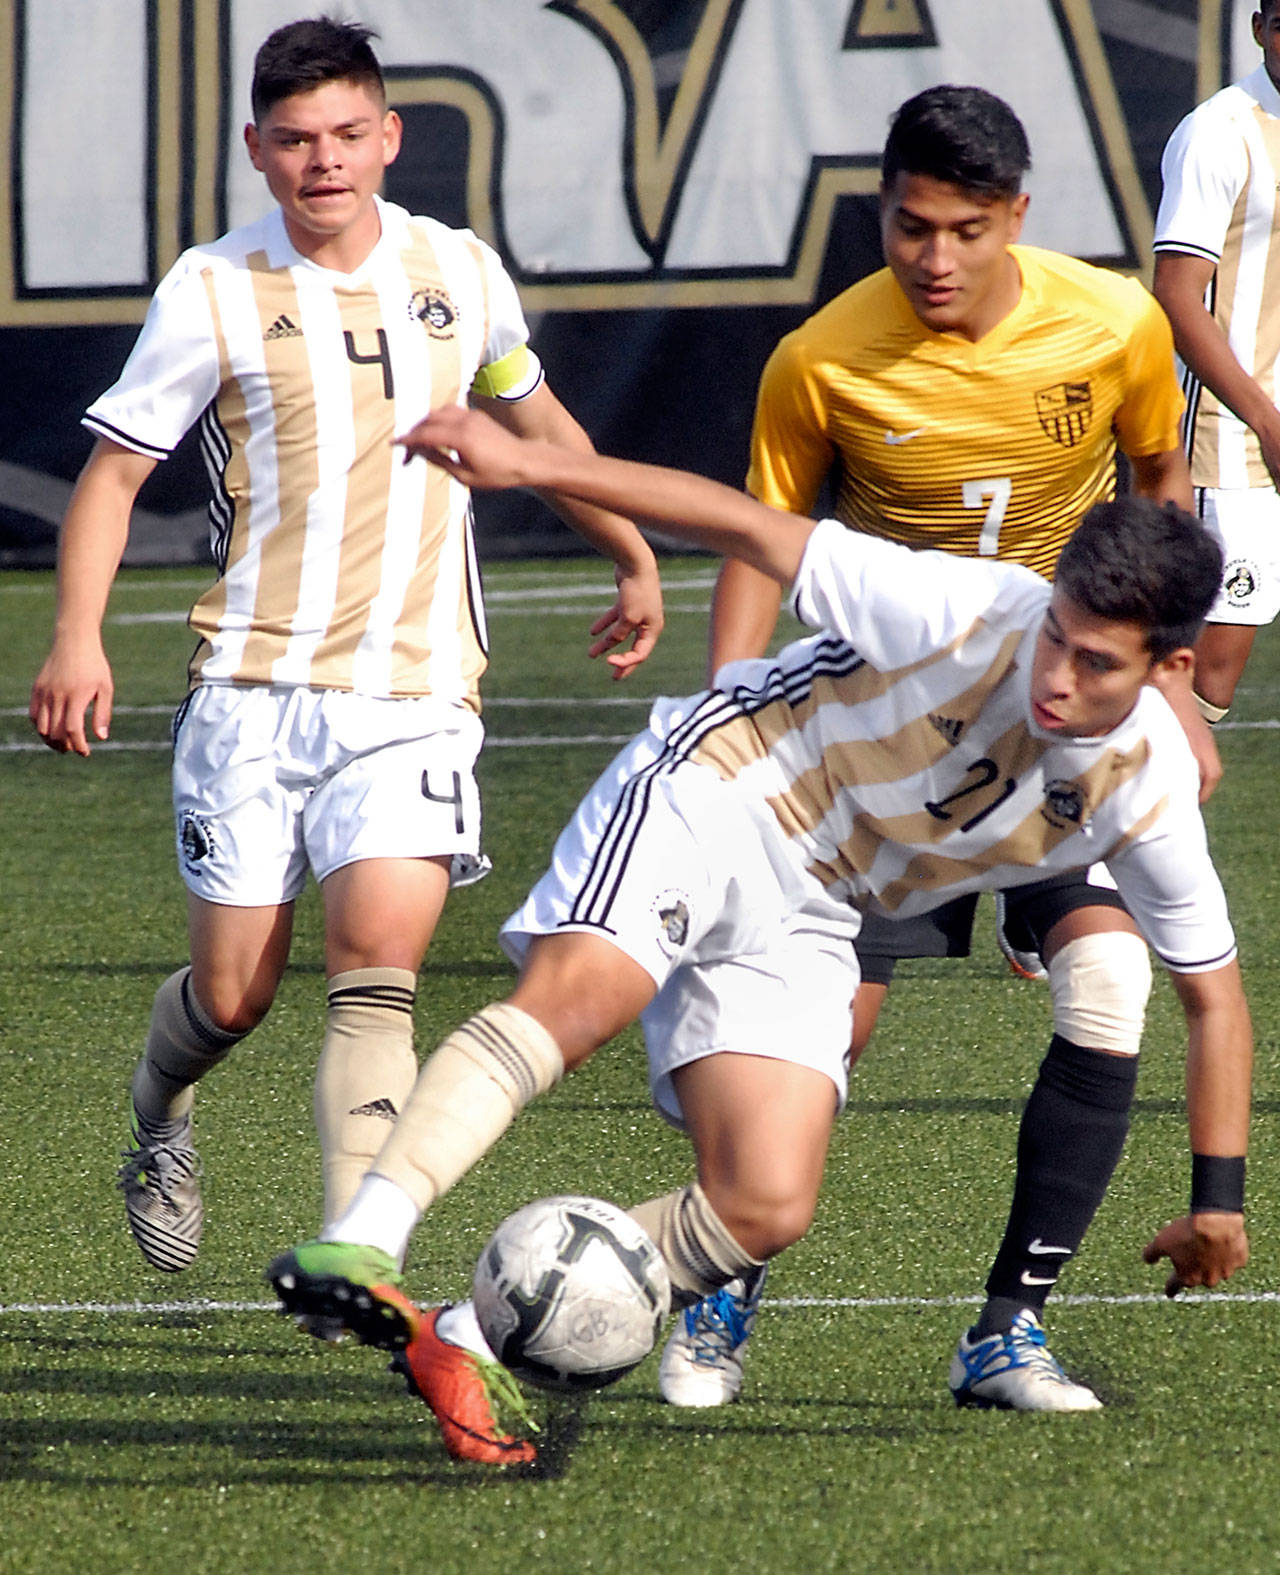 Keith Thorpe/Peninsula Daily News                                Peninsula’s Michael Benito, front, steals the ball from Walla Walla’s Victor Sanchez, right, as Benito’s teammate Sergio Gonzalez Reyes follows behind during their NWAC first round playoff game on Wednesday at the Wally Sigmar Sports Complex in Port Angeles.